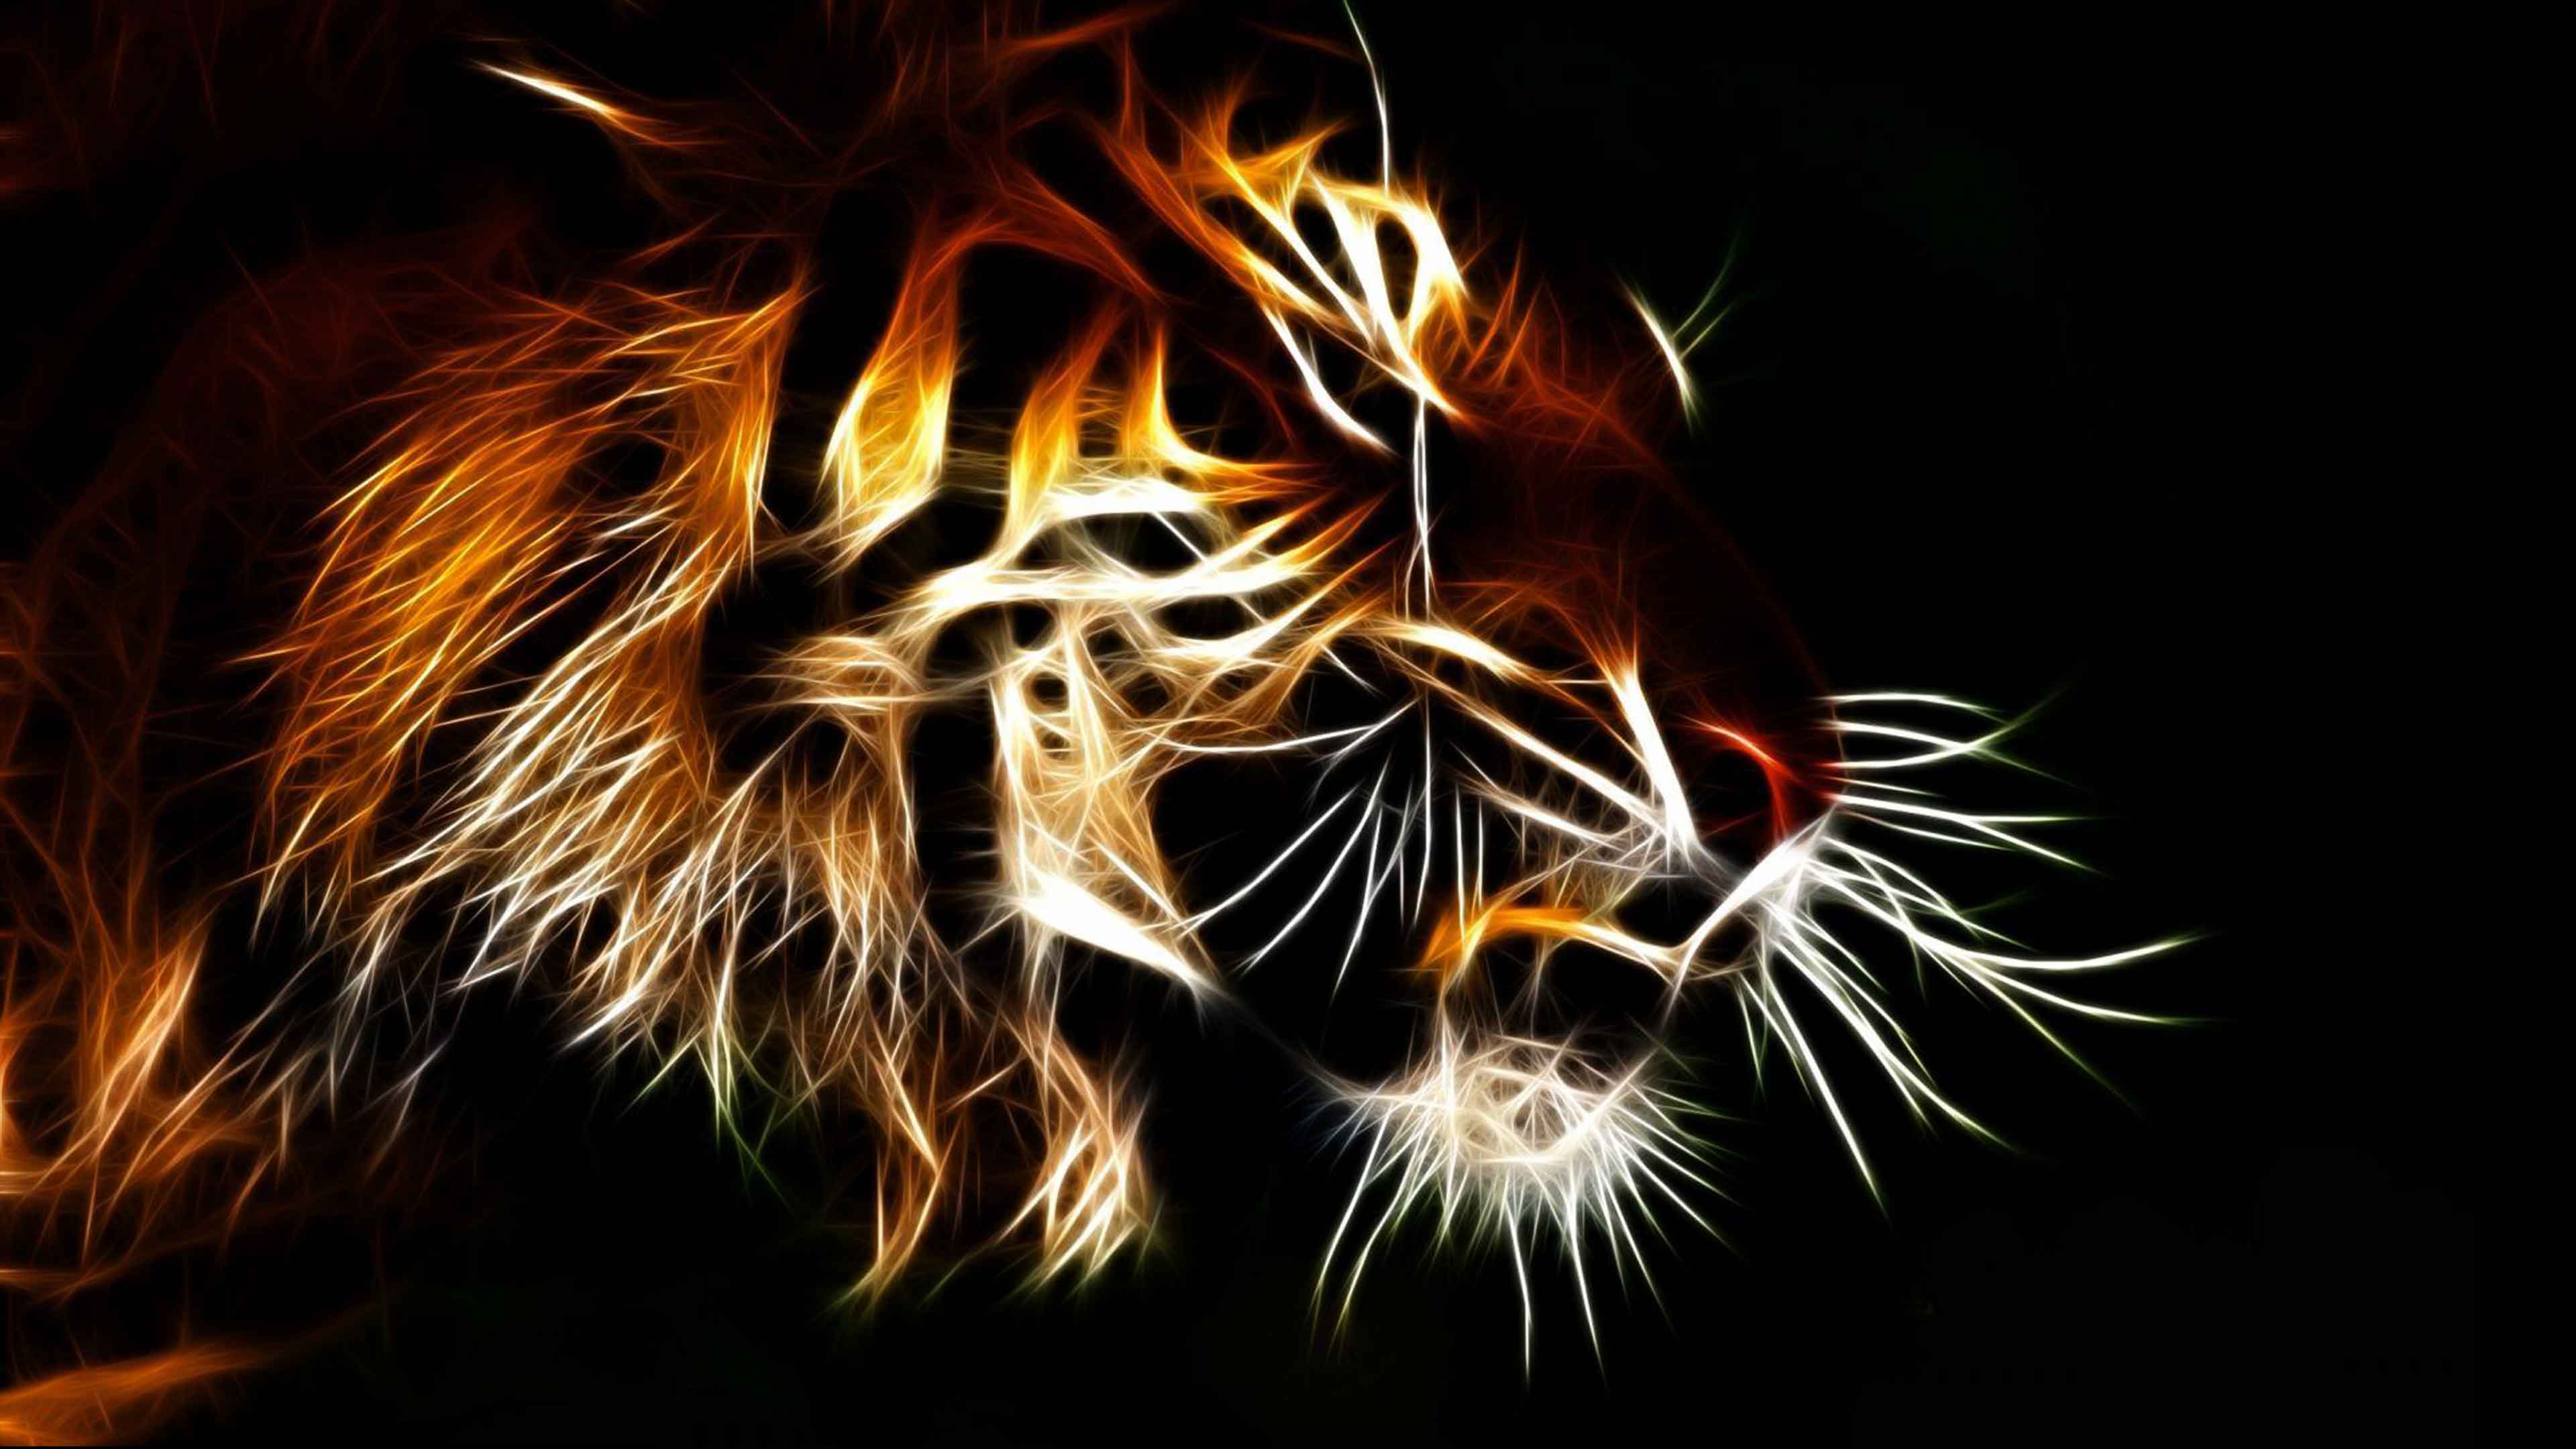 Get your Eye of the Tiger on with these ferocious wallpaper!